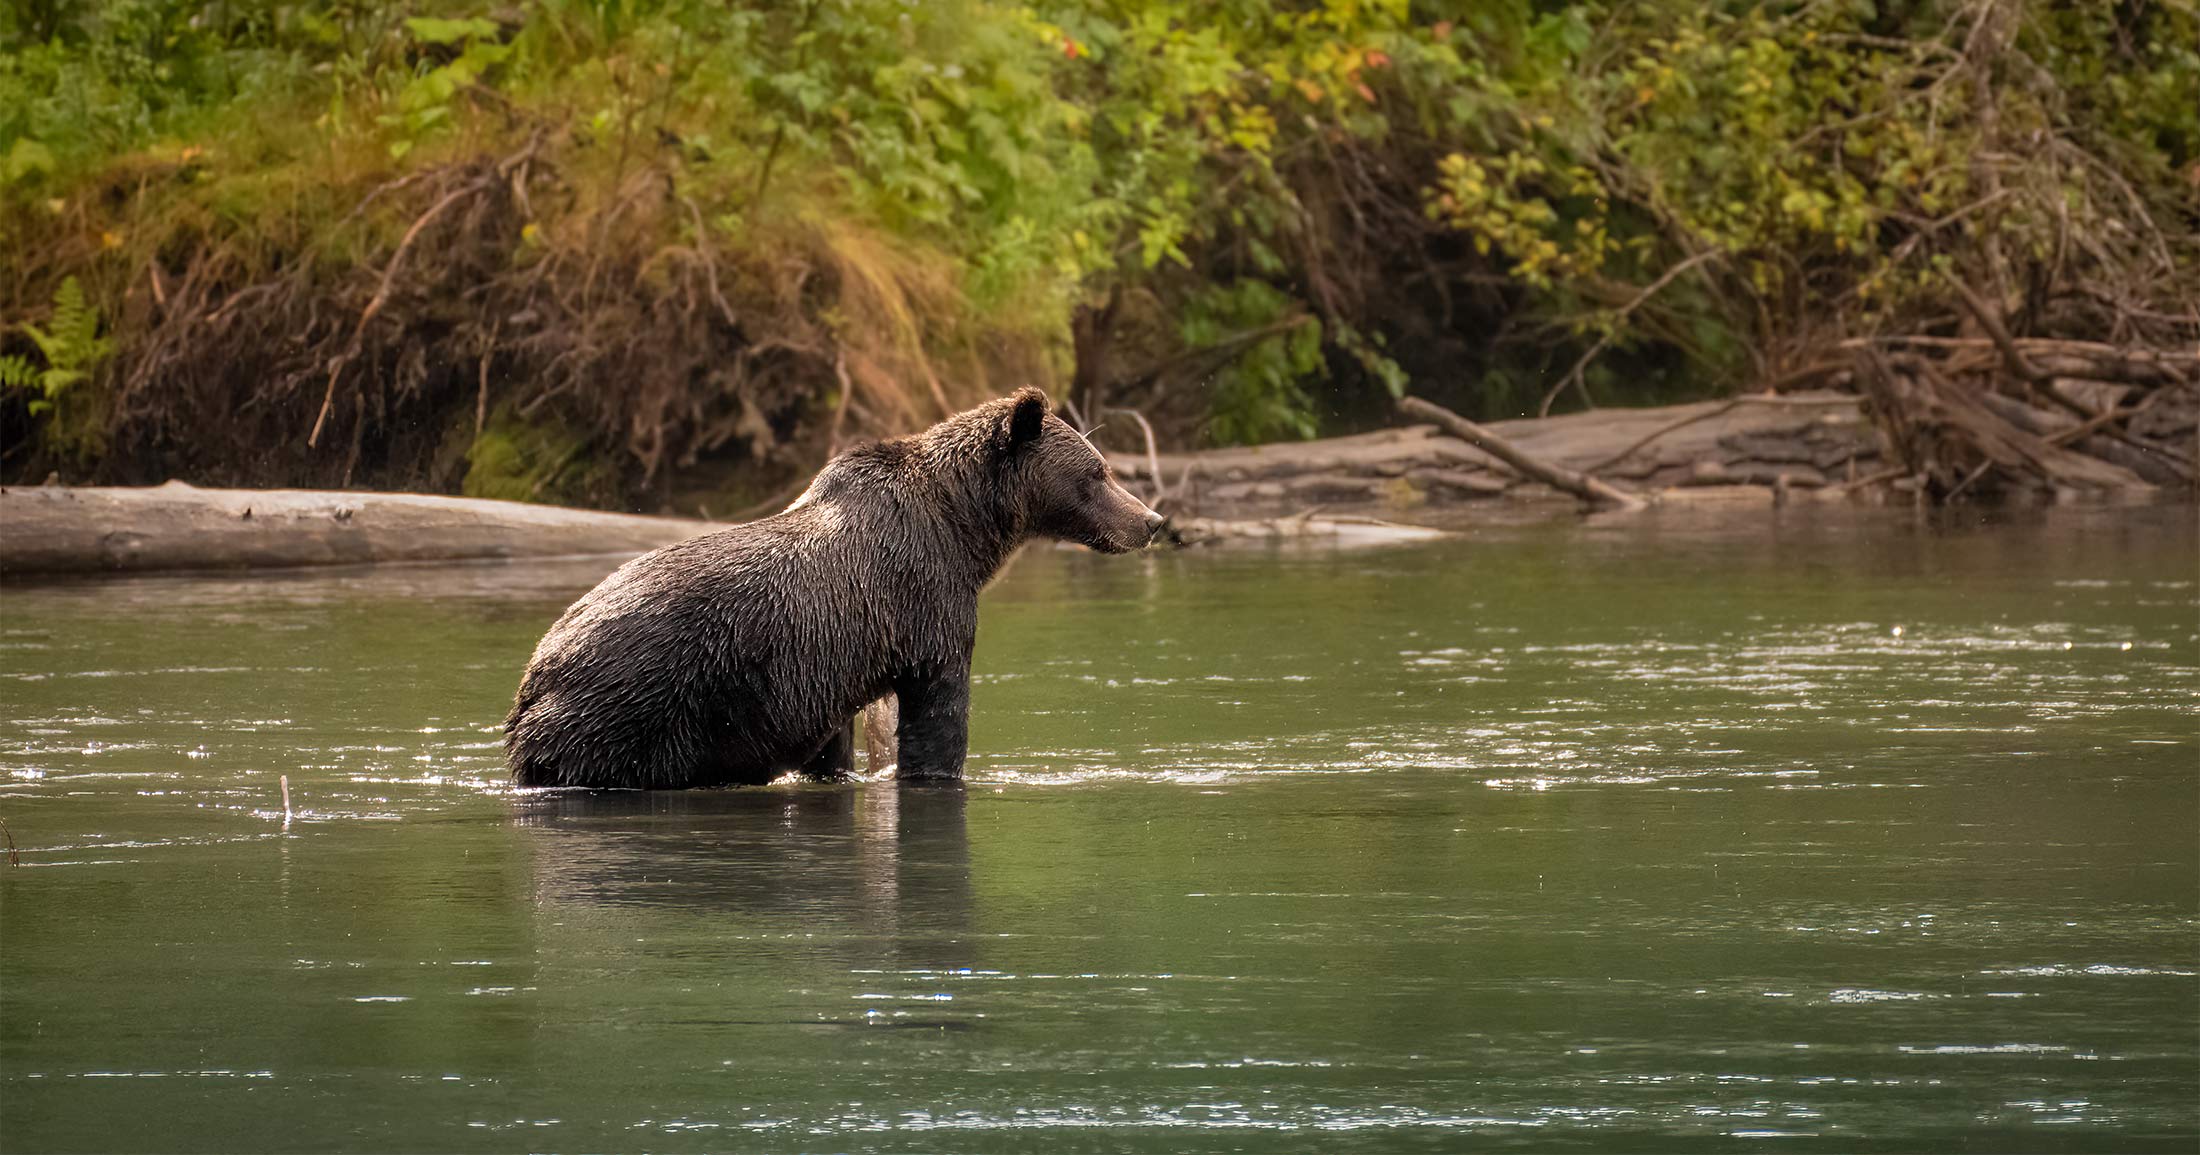 Grizzly bear standing in a river.